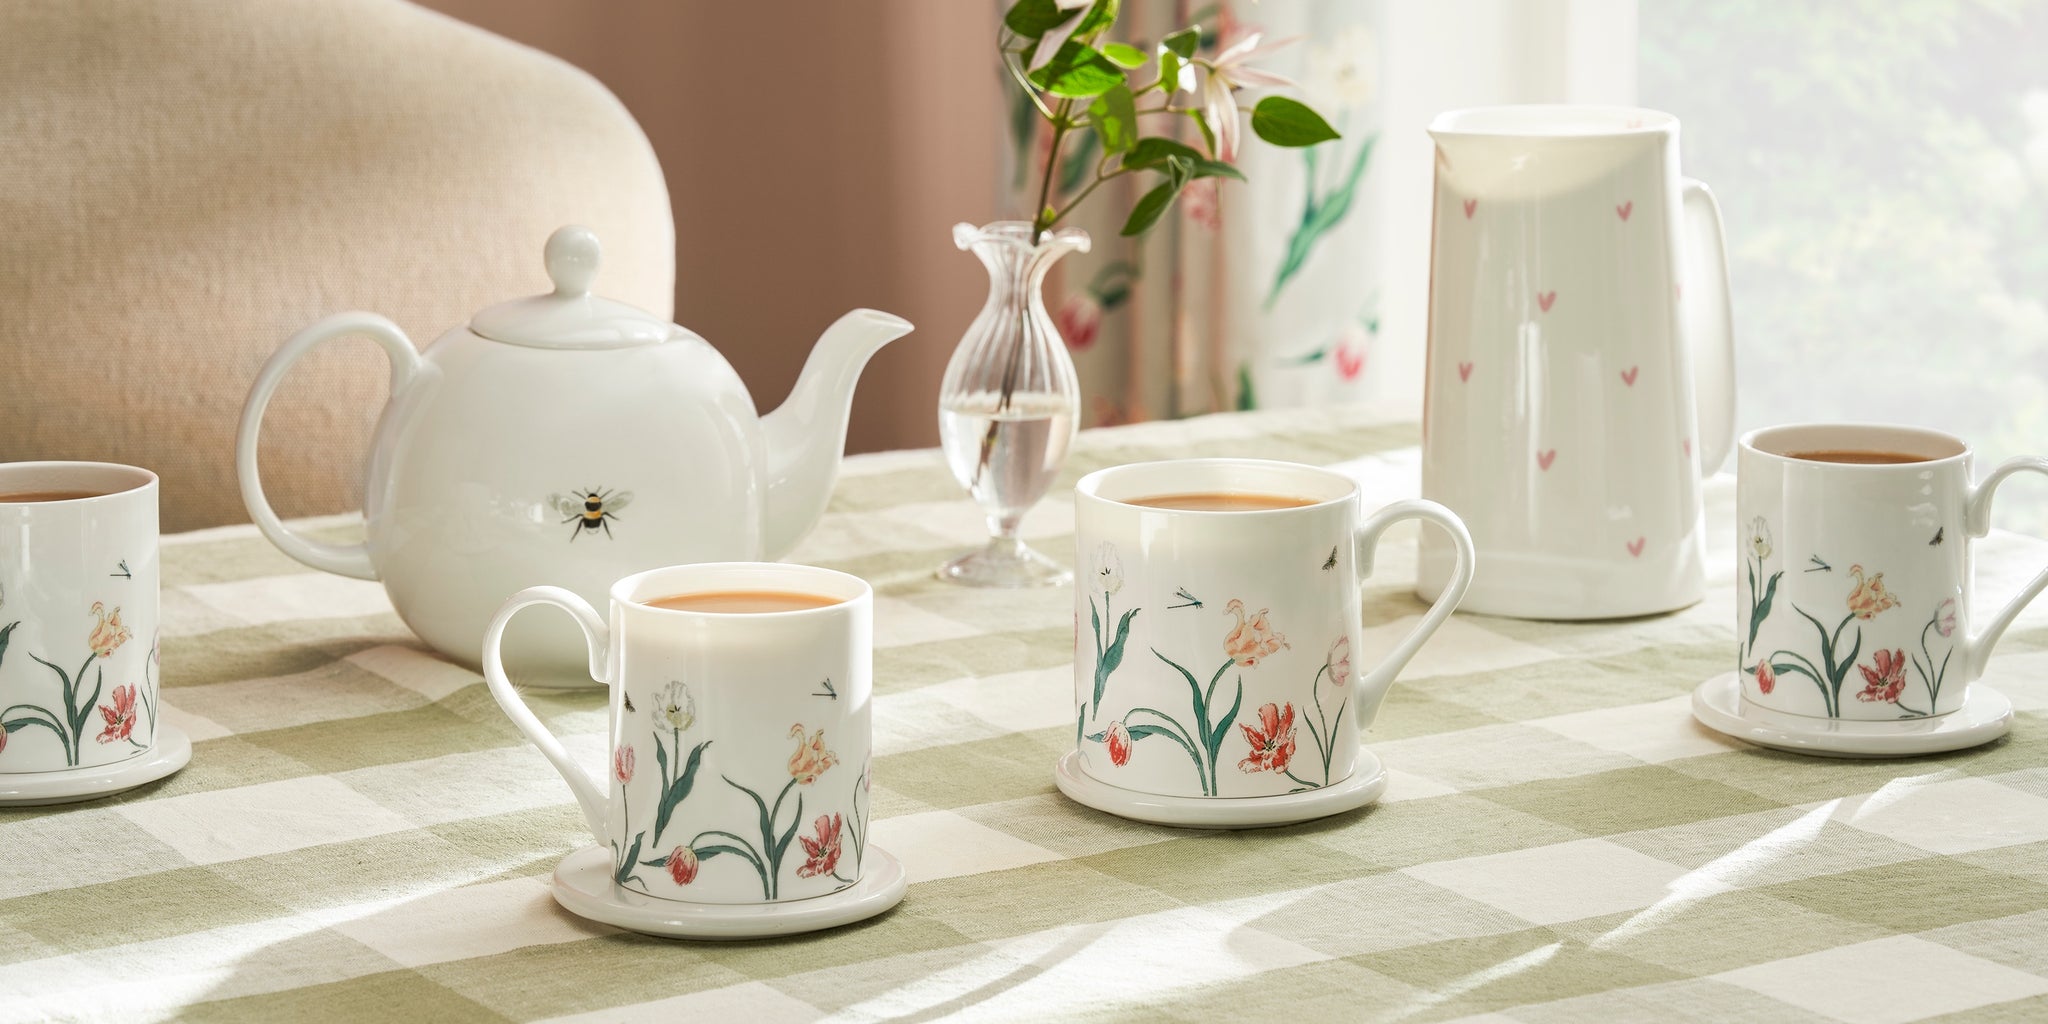 Sophie Allport fine bone china bees mug on kitchen counter with matching bees Dualit kettle and toaster